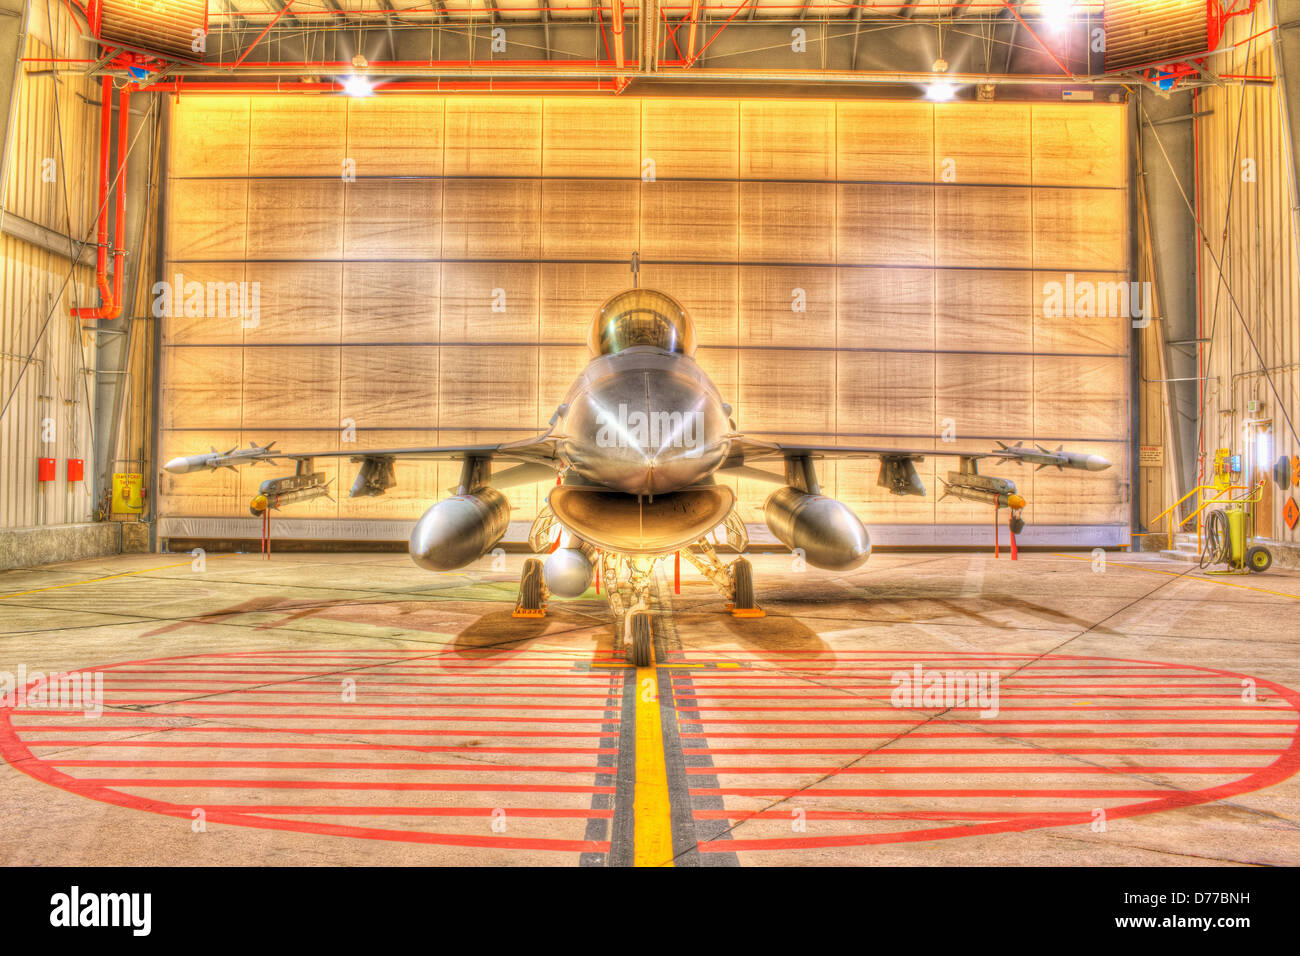 F-16 Alert Jet in Hangar Loaded Live Weapons High Dynamic Range or HDR Image Stock Photo